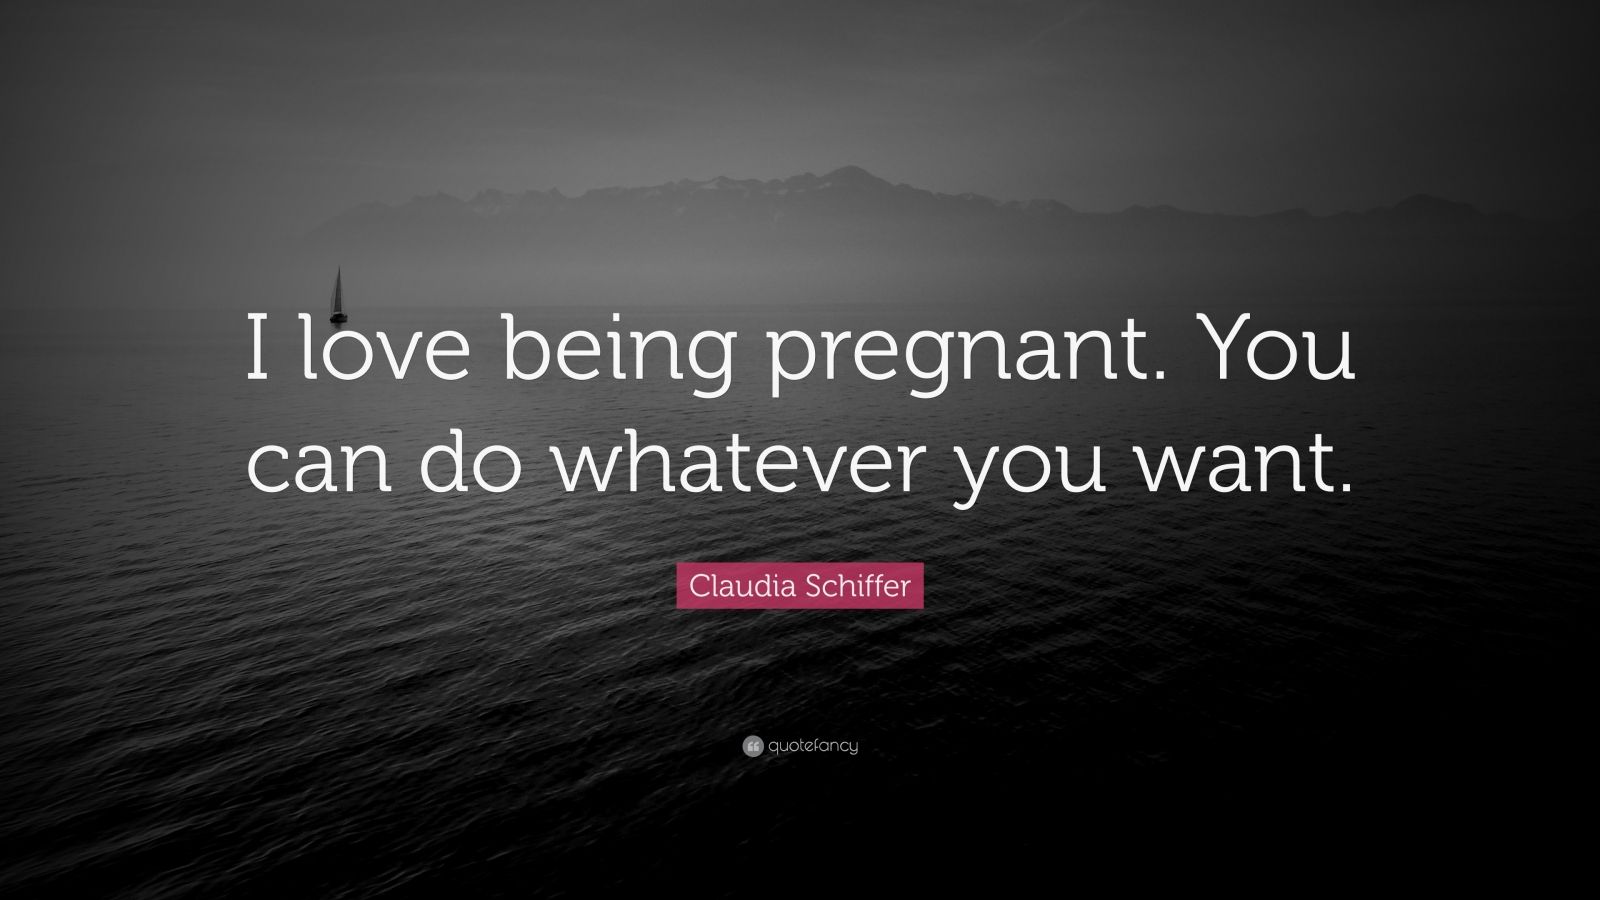 Claudia Schiffer Quote: “I love being pregnant. You can do whatever you ...